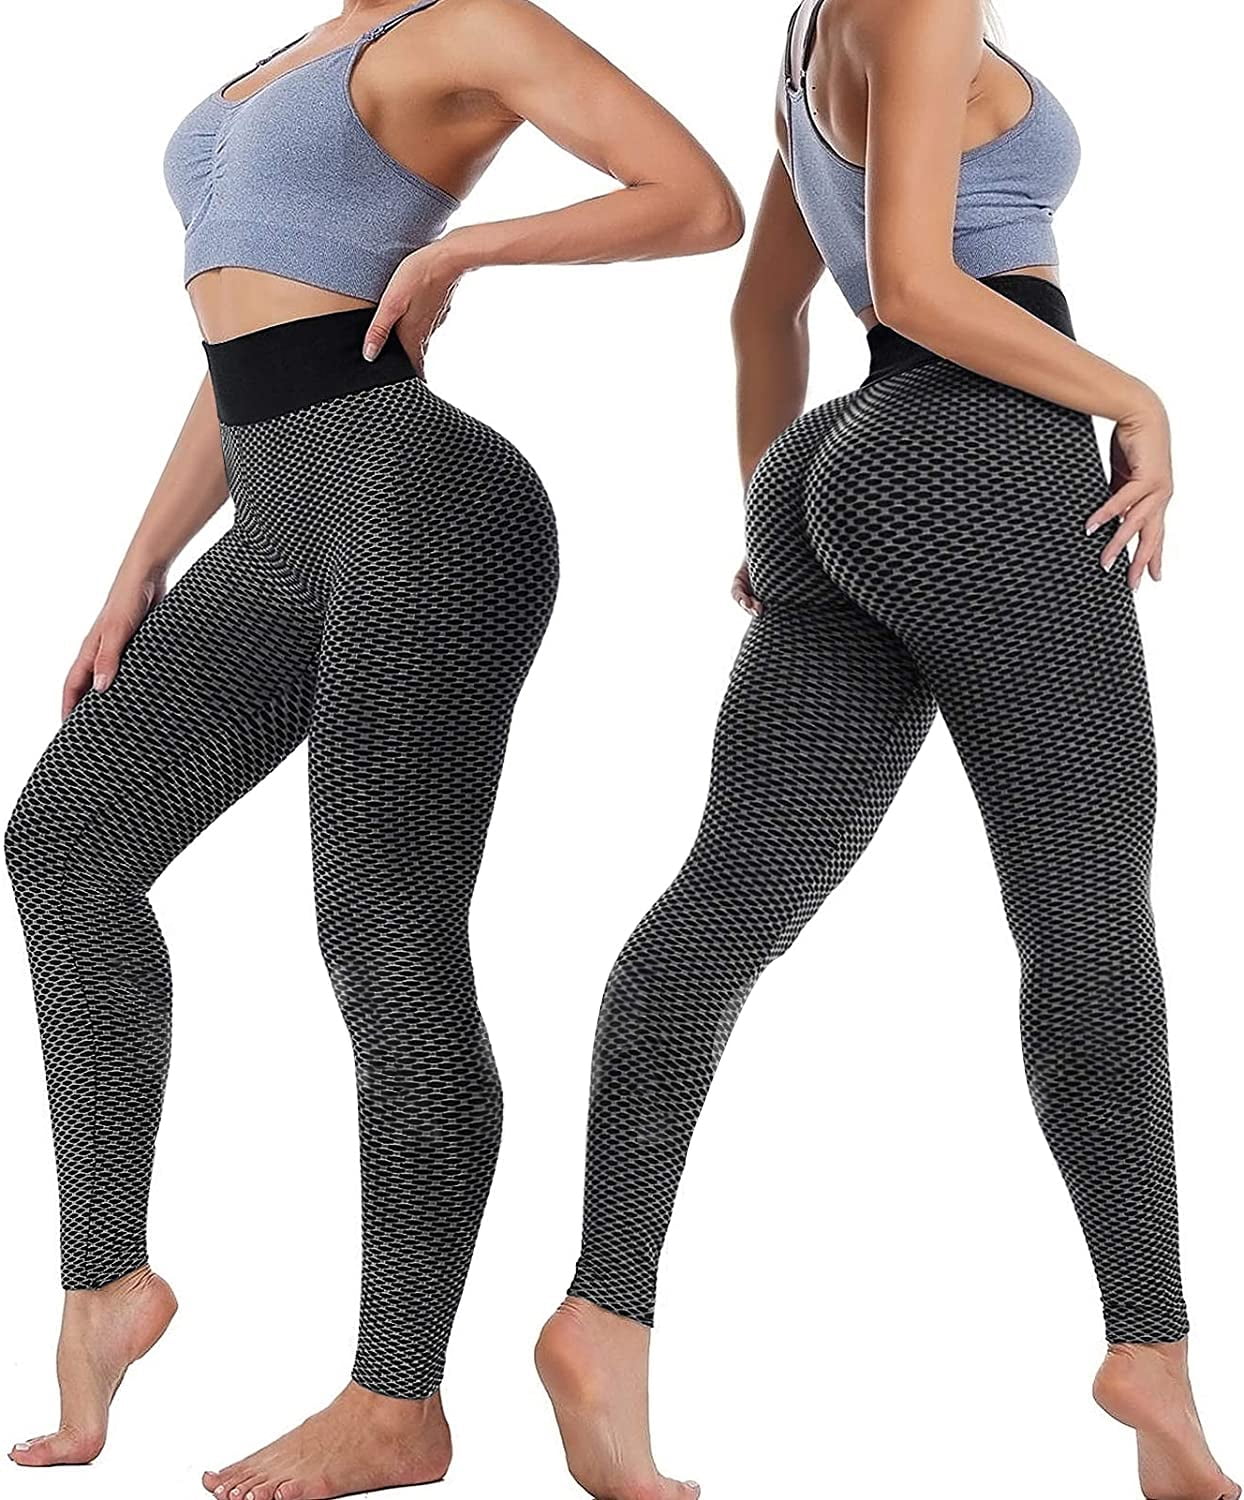  RUNNING GIRL Butt Lift Leggings for Women, Workout Yoga  Leggings Seamless 4 Way Stretch Squat Proof(CK2615_Green_XL) : Clothing,  Shoes & Jewelry